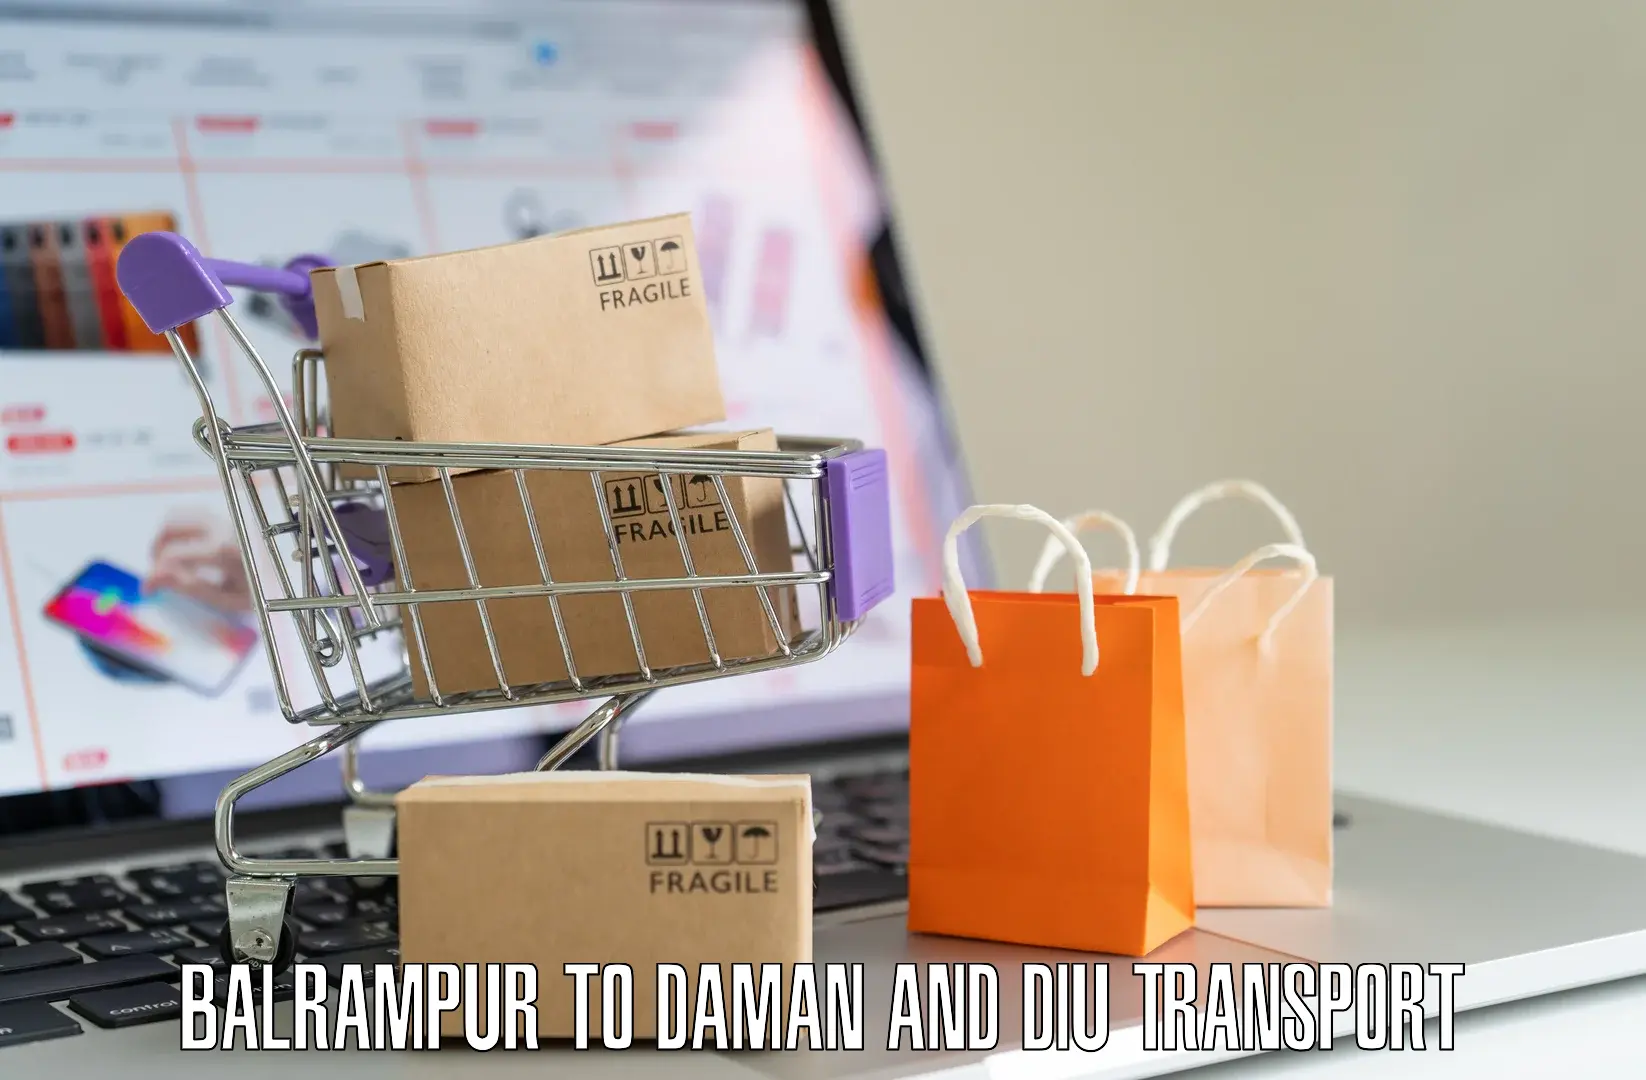 Vehicle courier services Balrampur to Daman and Diu